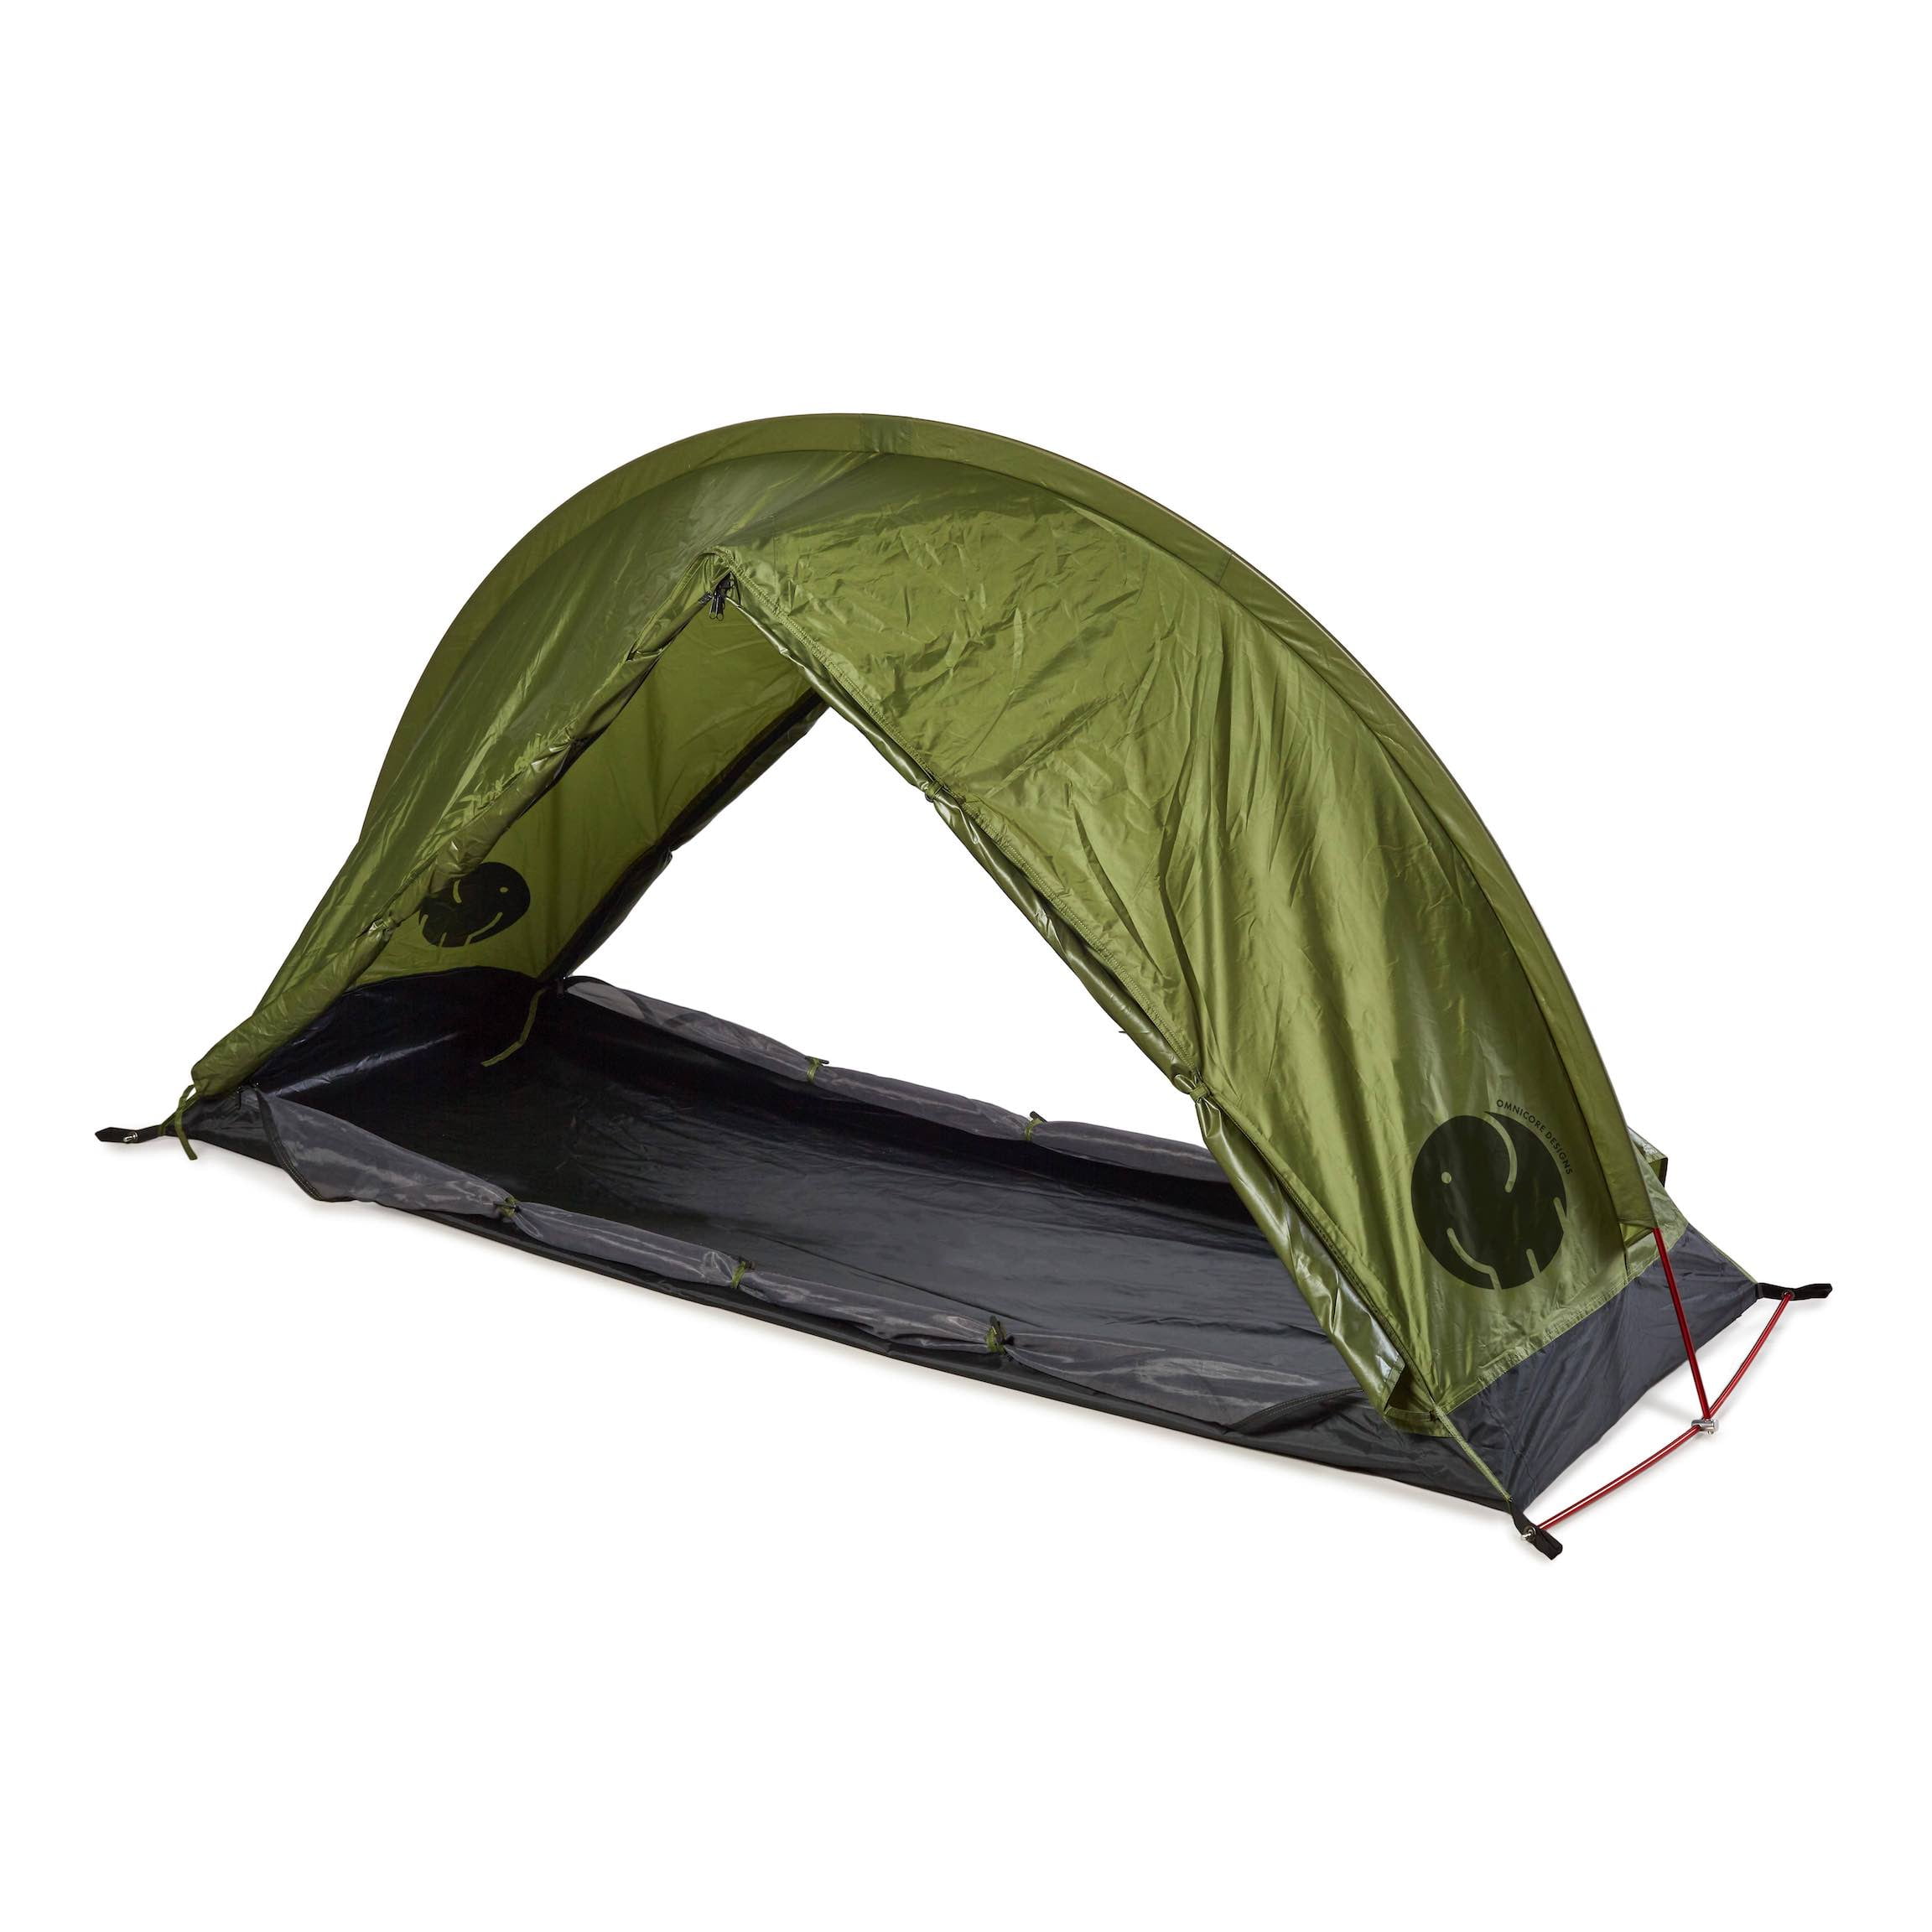 OmniCore Designs LINK1 1Person UL Backpacking Tent - Walmart.com